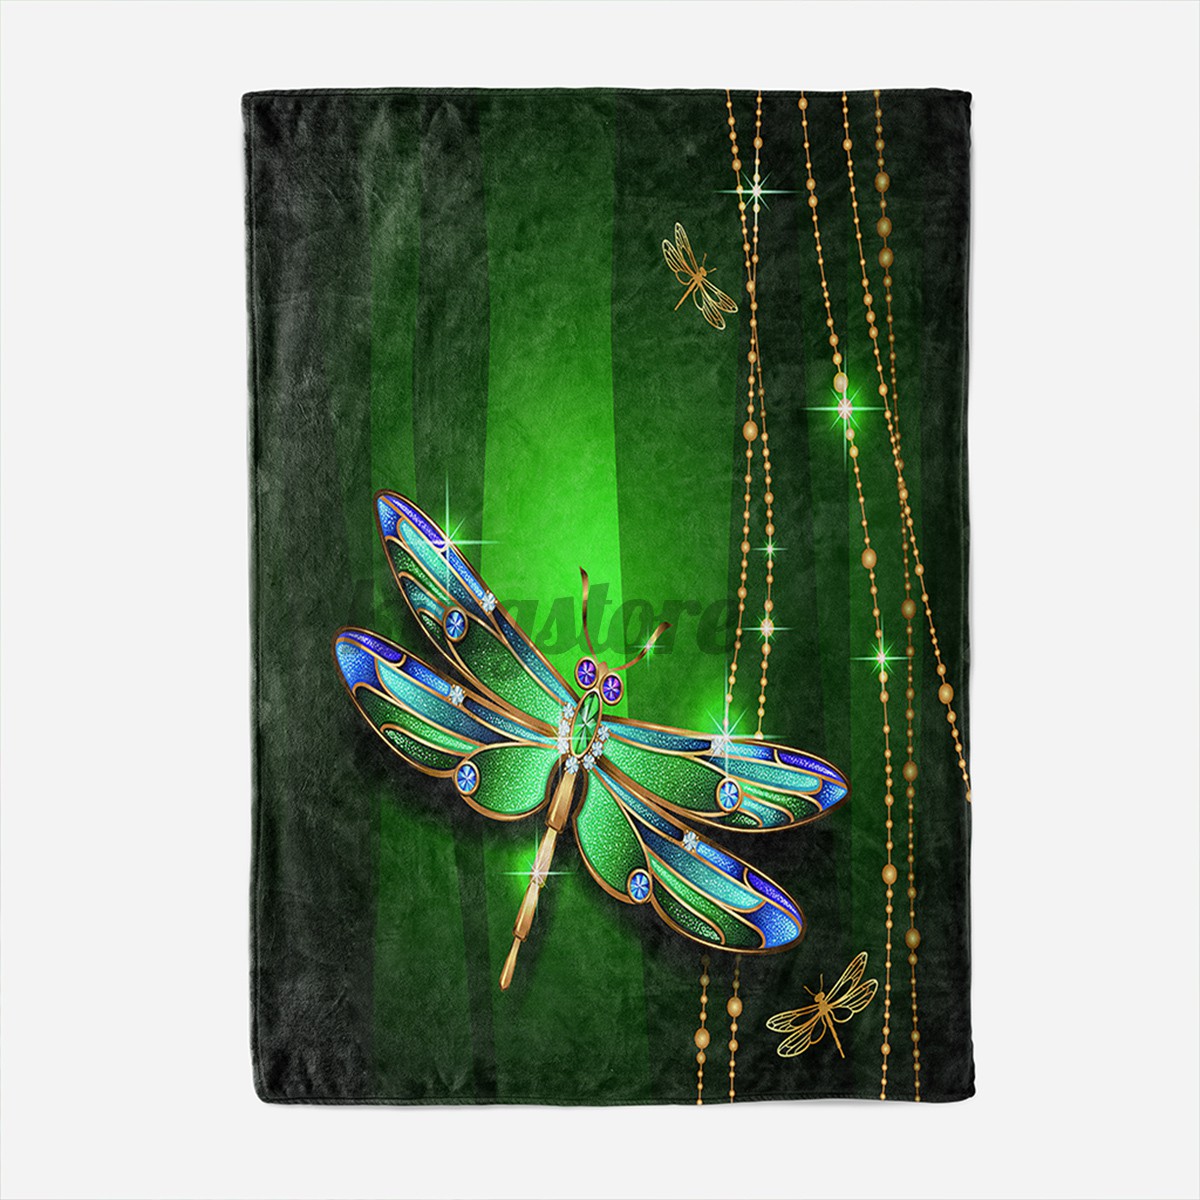 150x200CM Big Size 3D Dragonfly Printing Plush Fleece Blanket Adult Fashion Quilts Home Office Washable